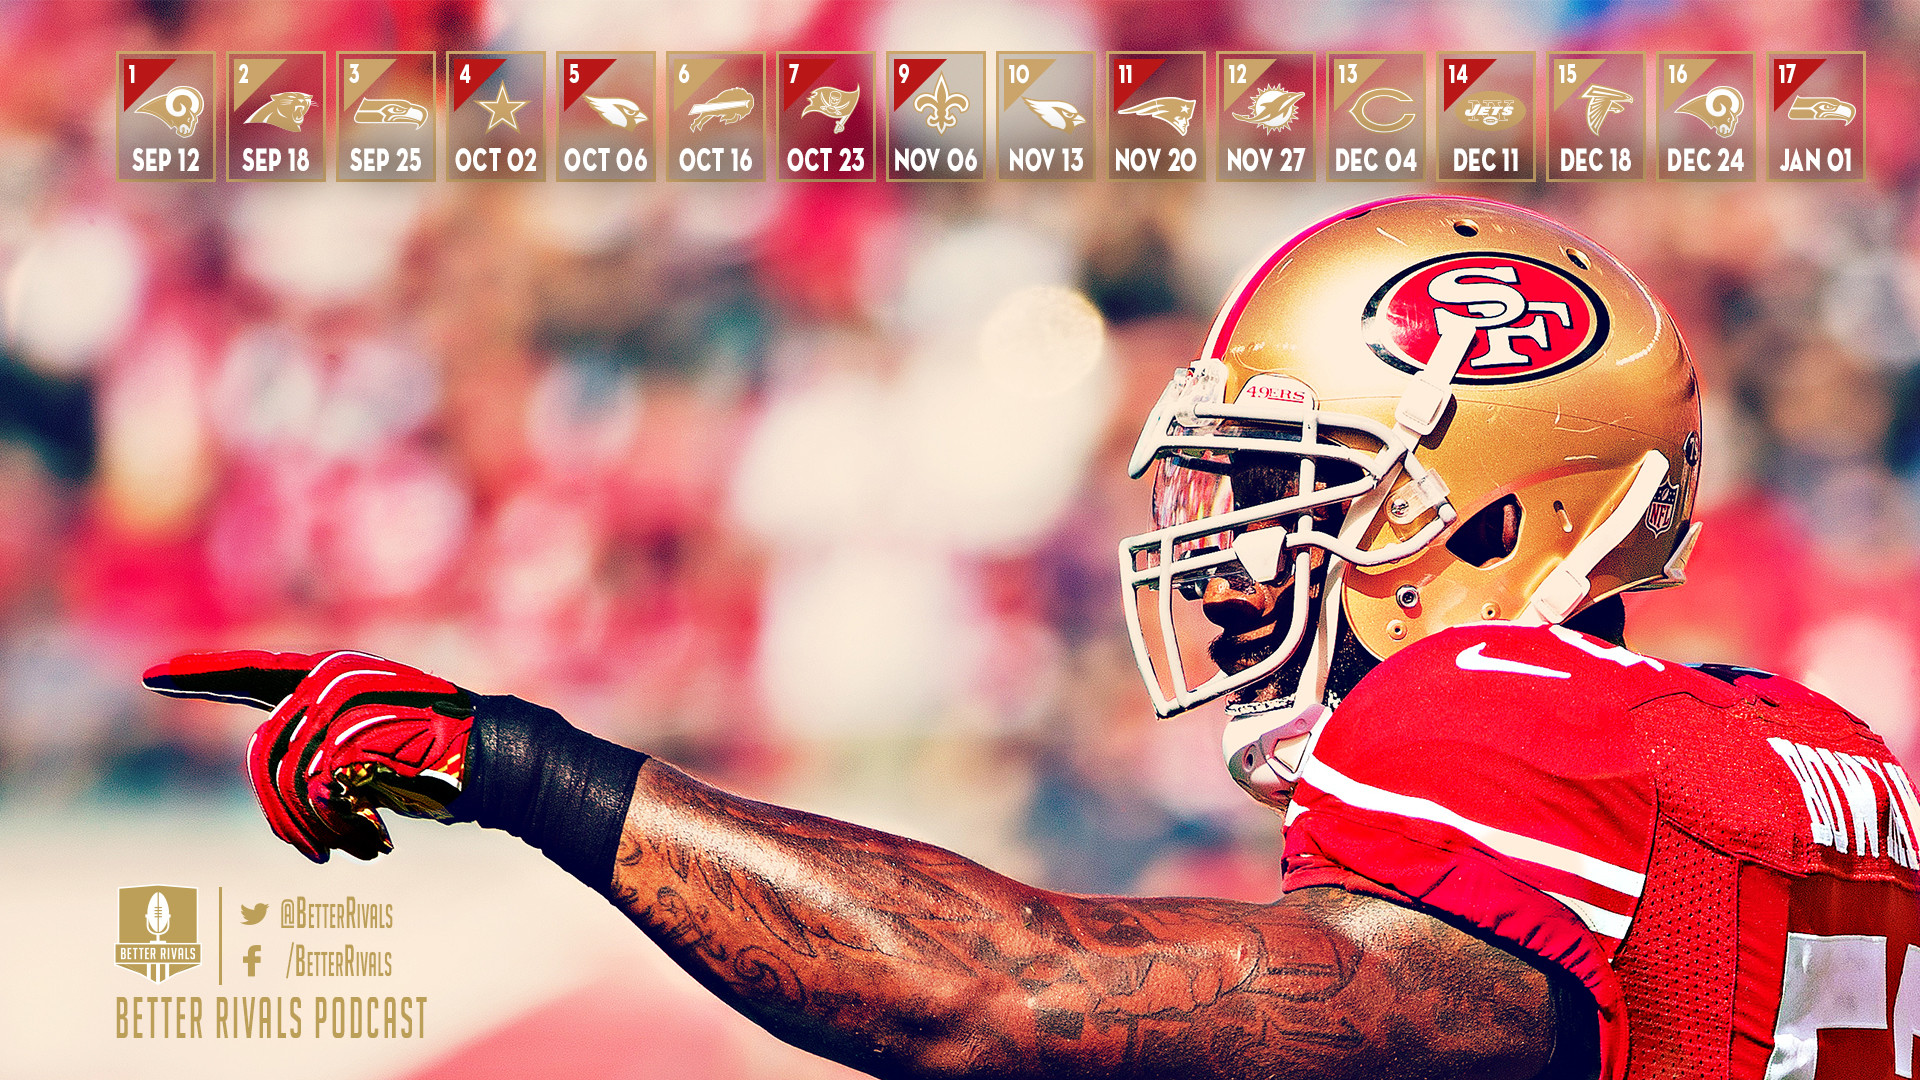 New 49ers wallpapers for desktop and mobile niners nation